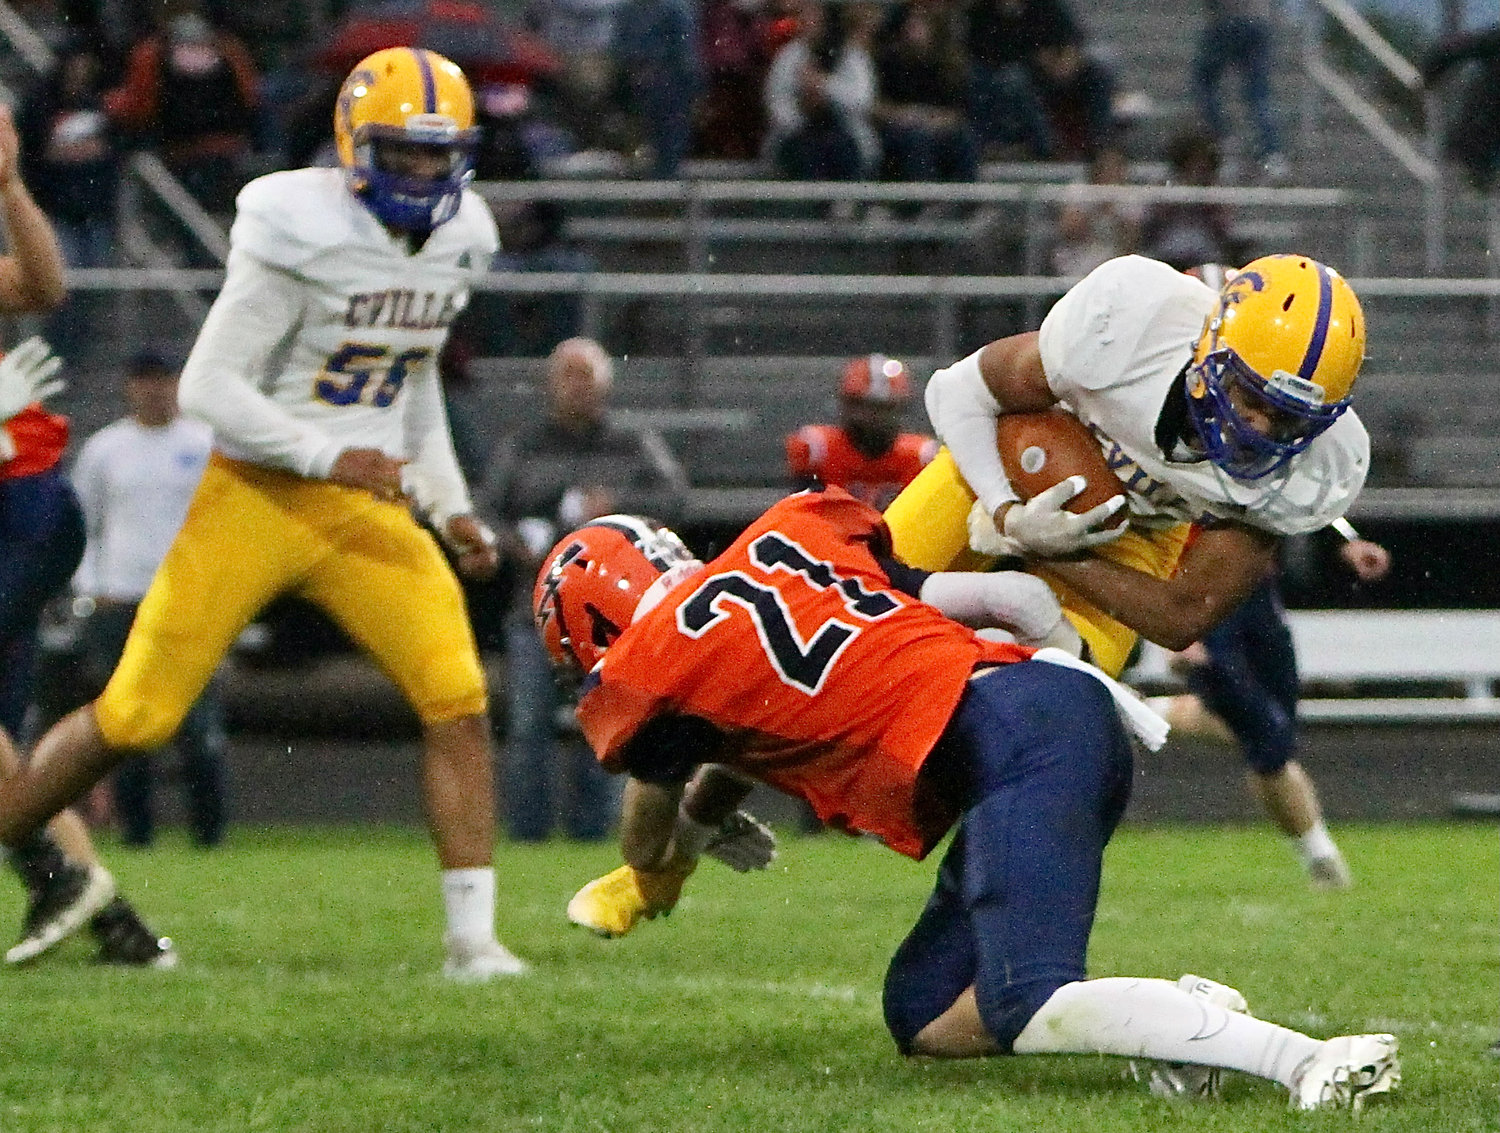 Kelby Harwood makes a nice tackle for the Chargers.